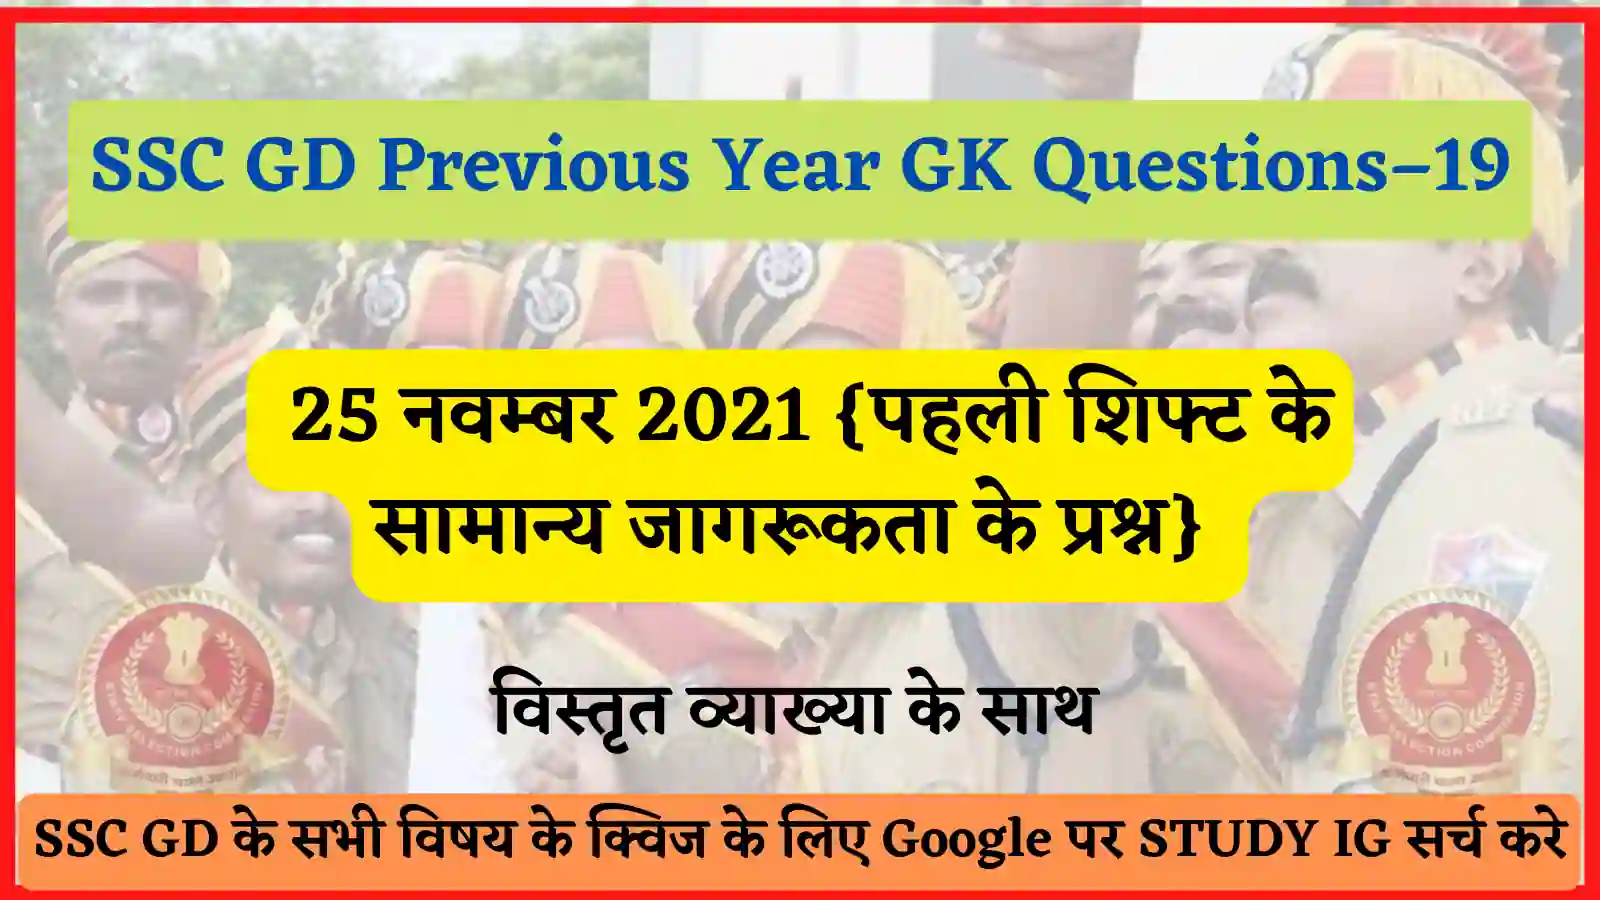 SSC GD Previous Year GK Questions / Quiz - 19